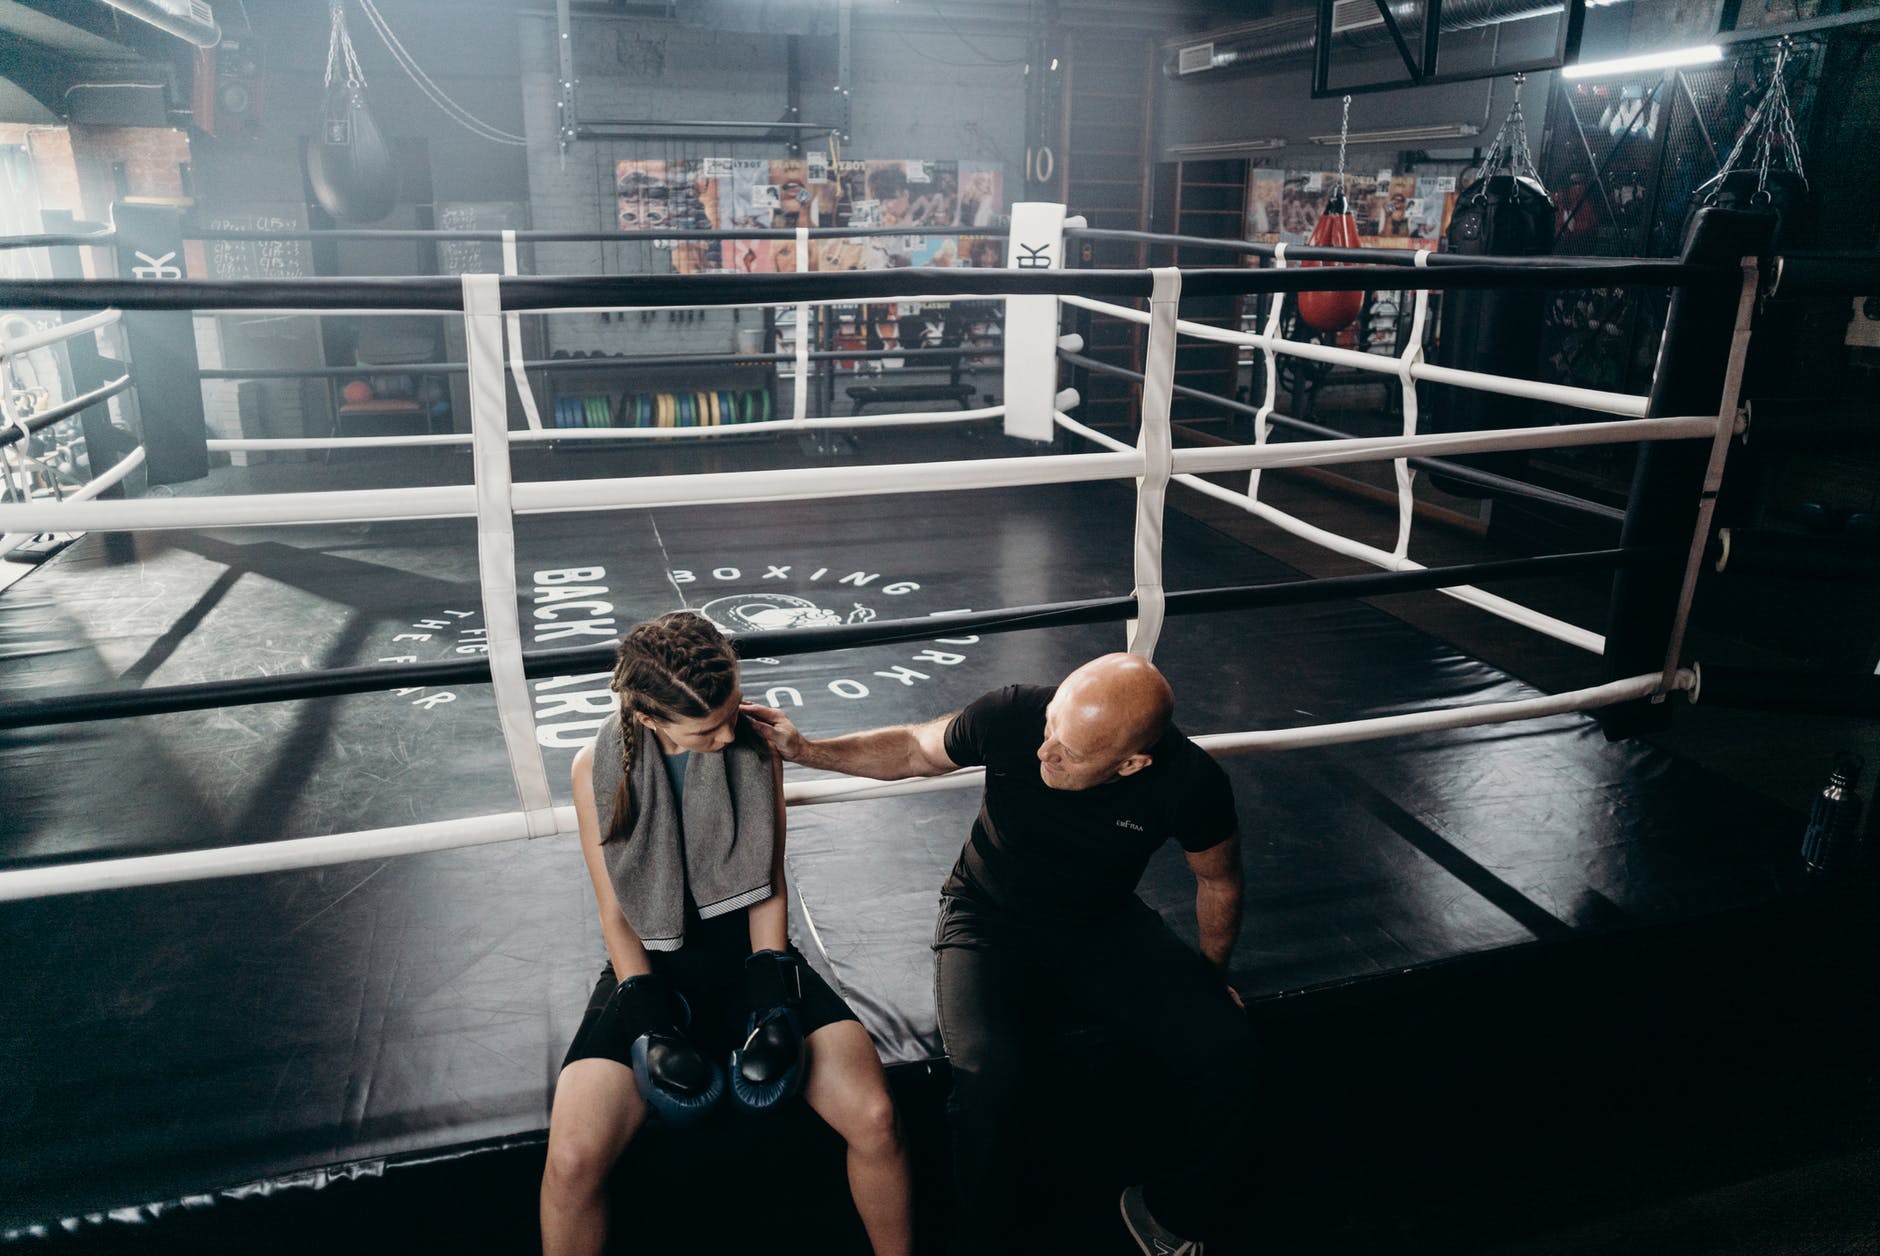 Tour Gallery of the Ring Gym